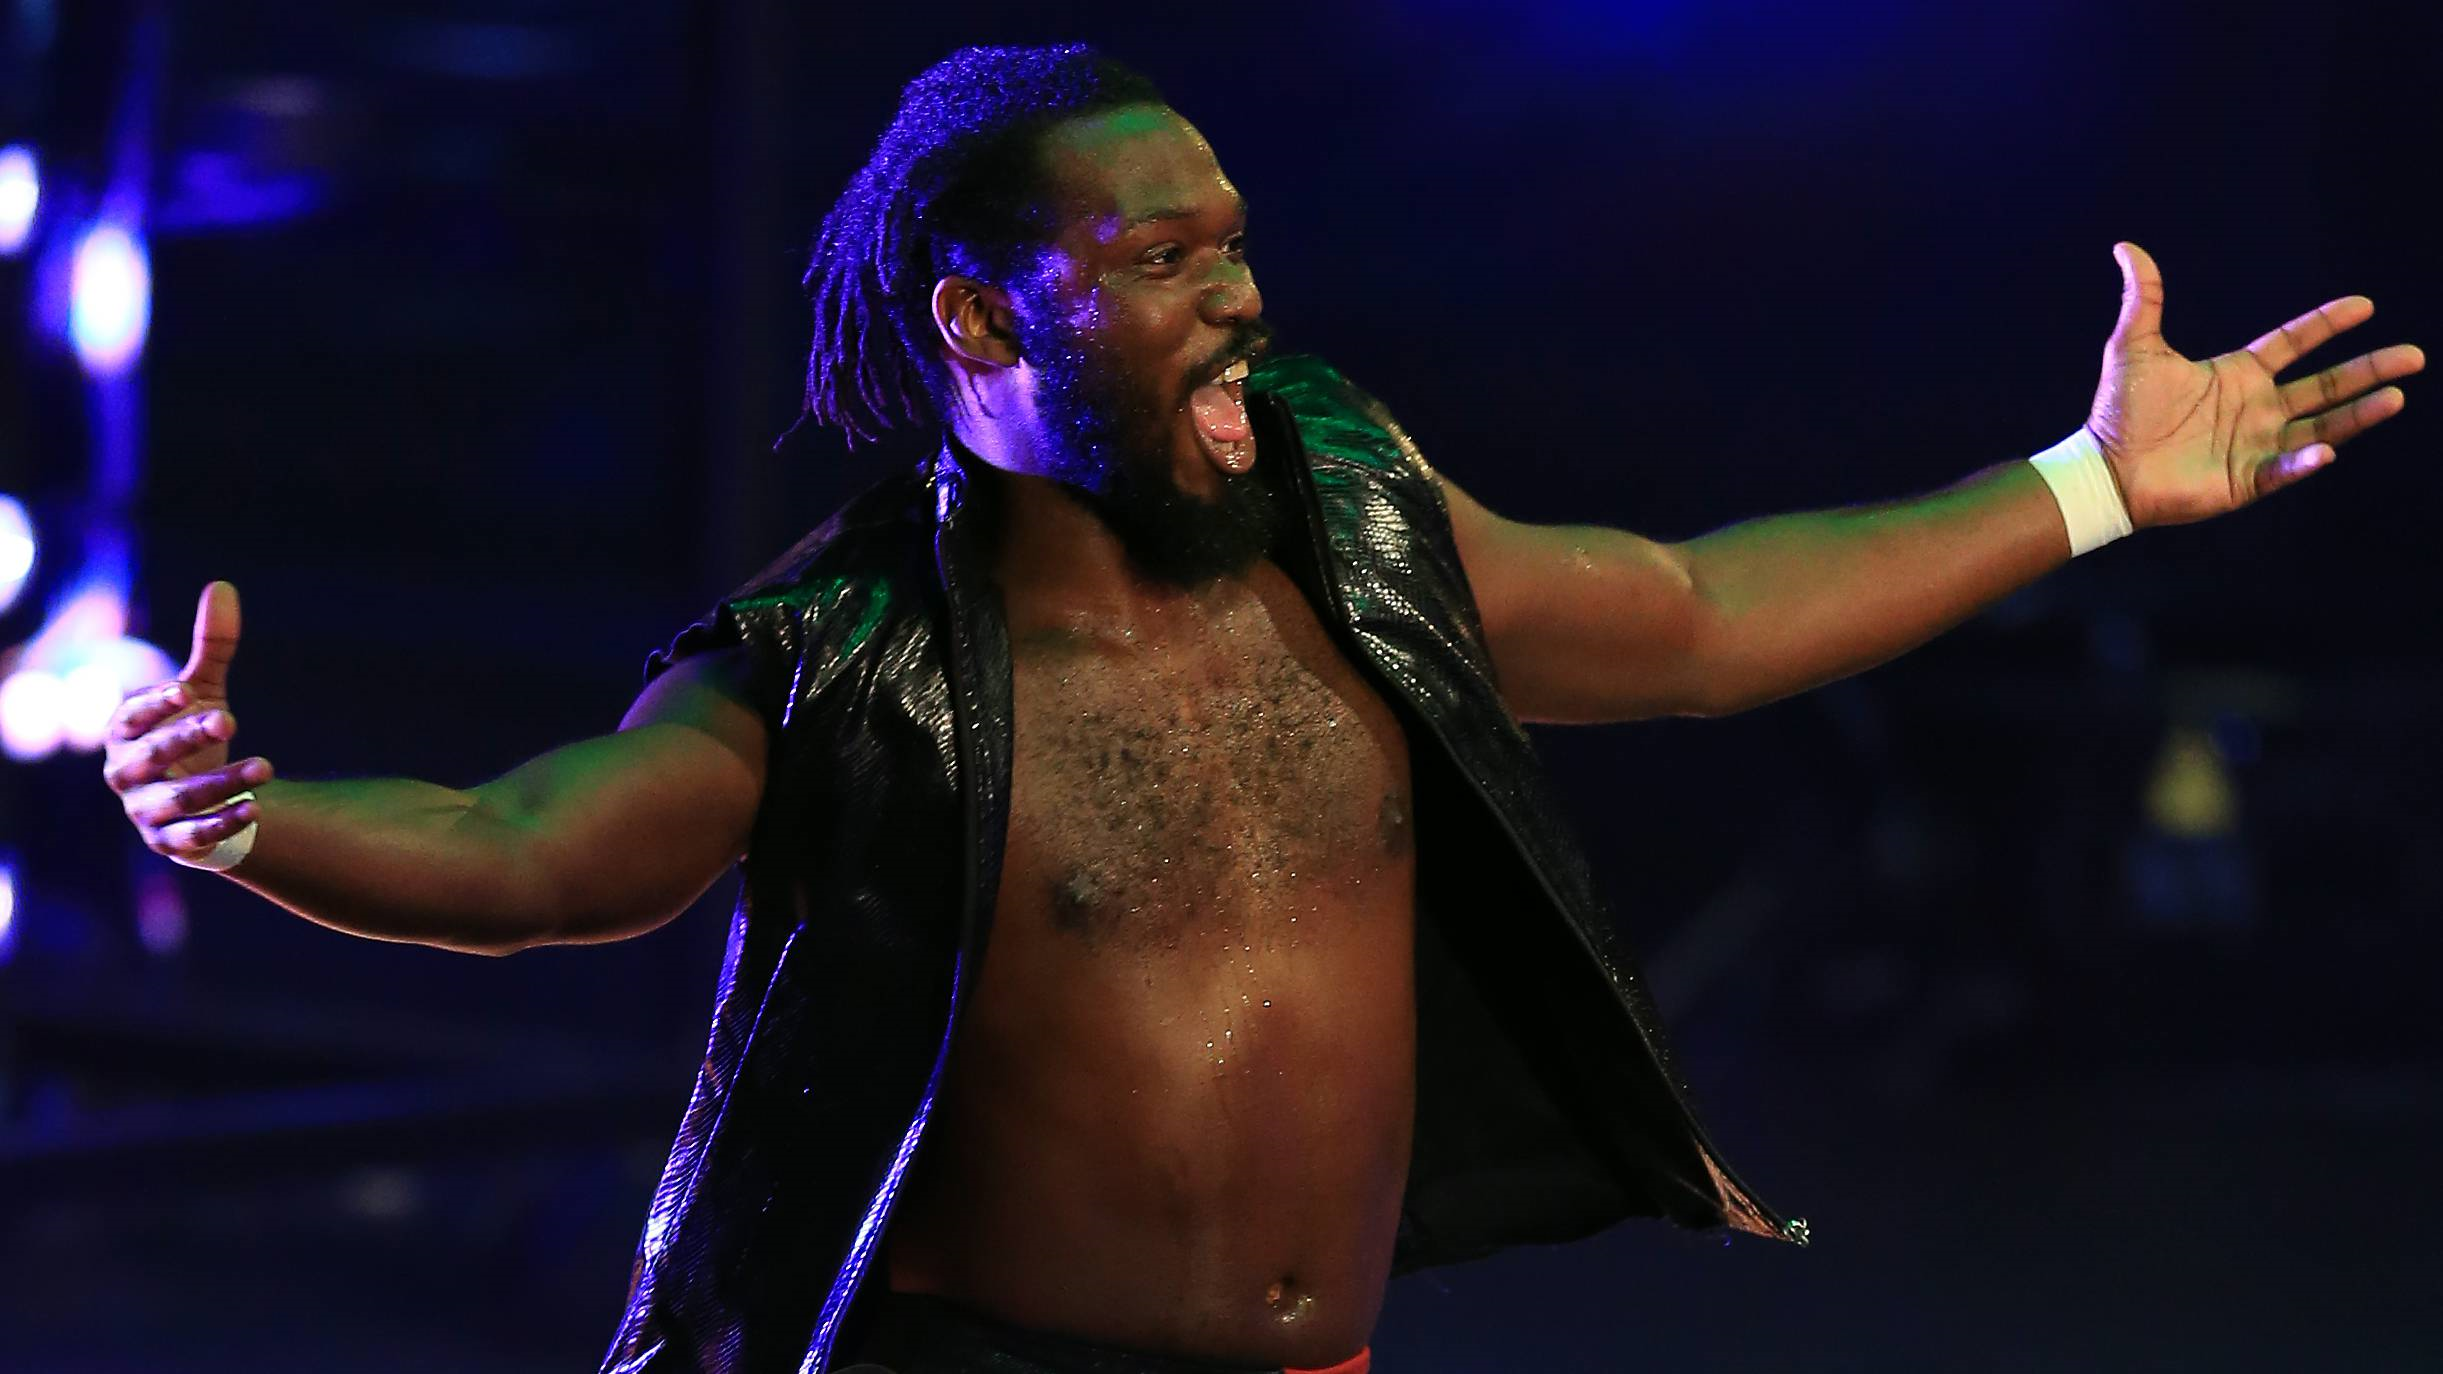 WWE’s Rich Swann is Changing the Way We Look at Diversity in Pro Wrestling